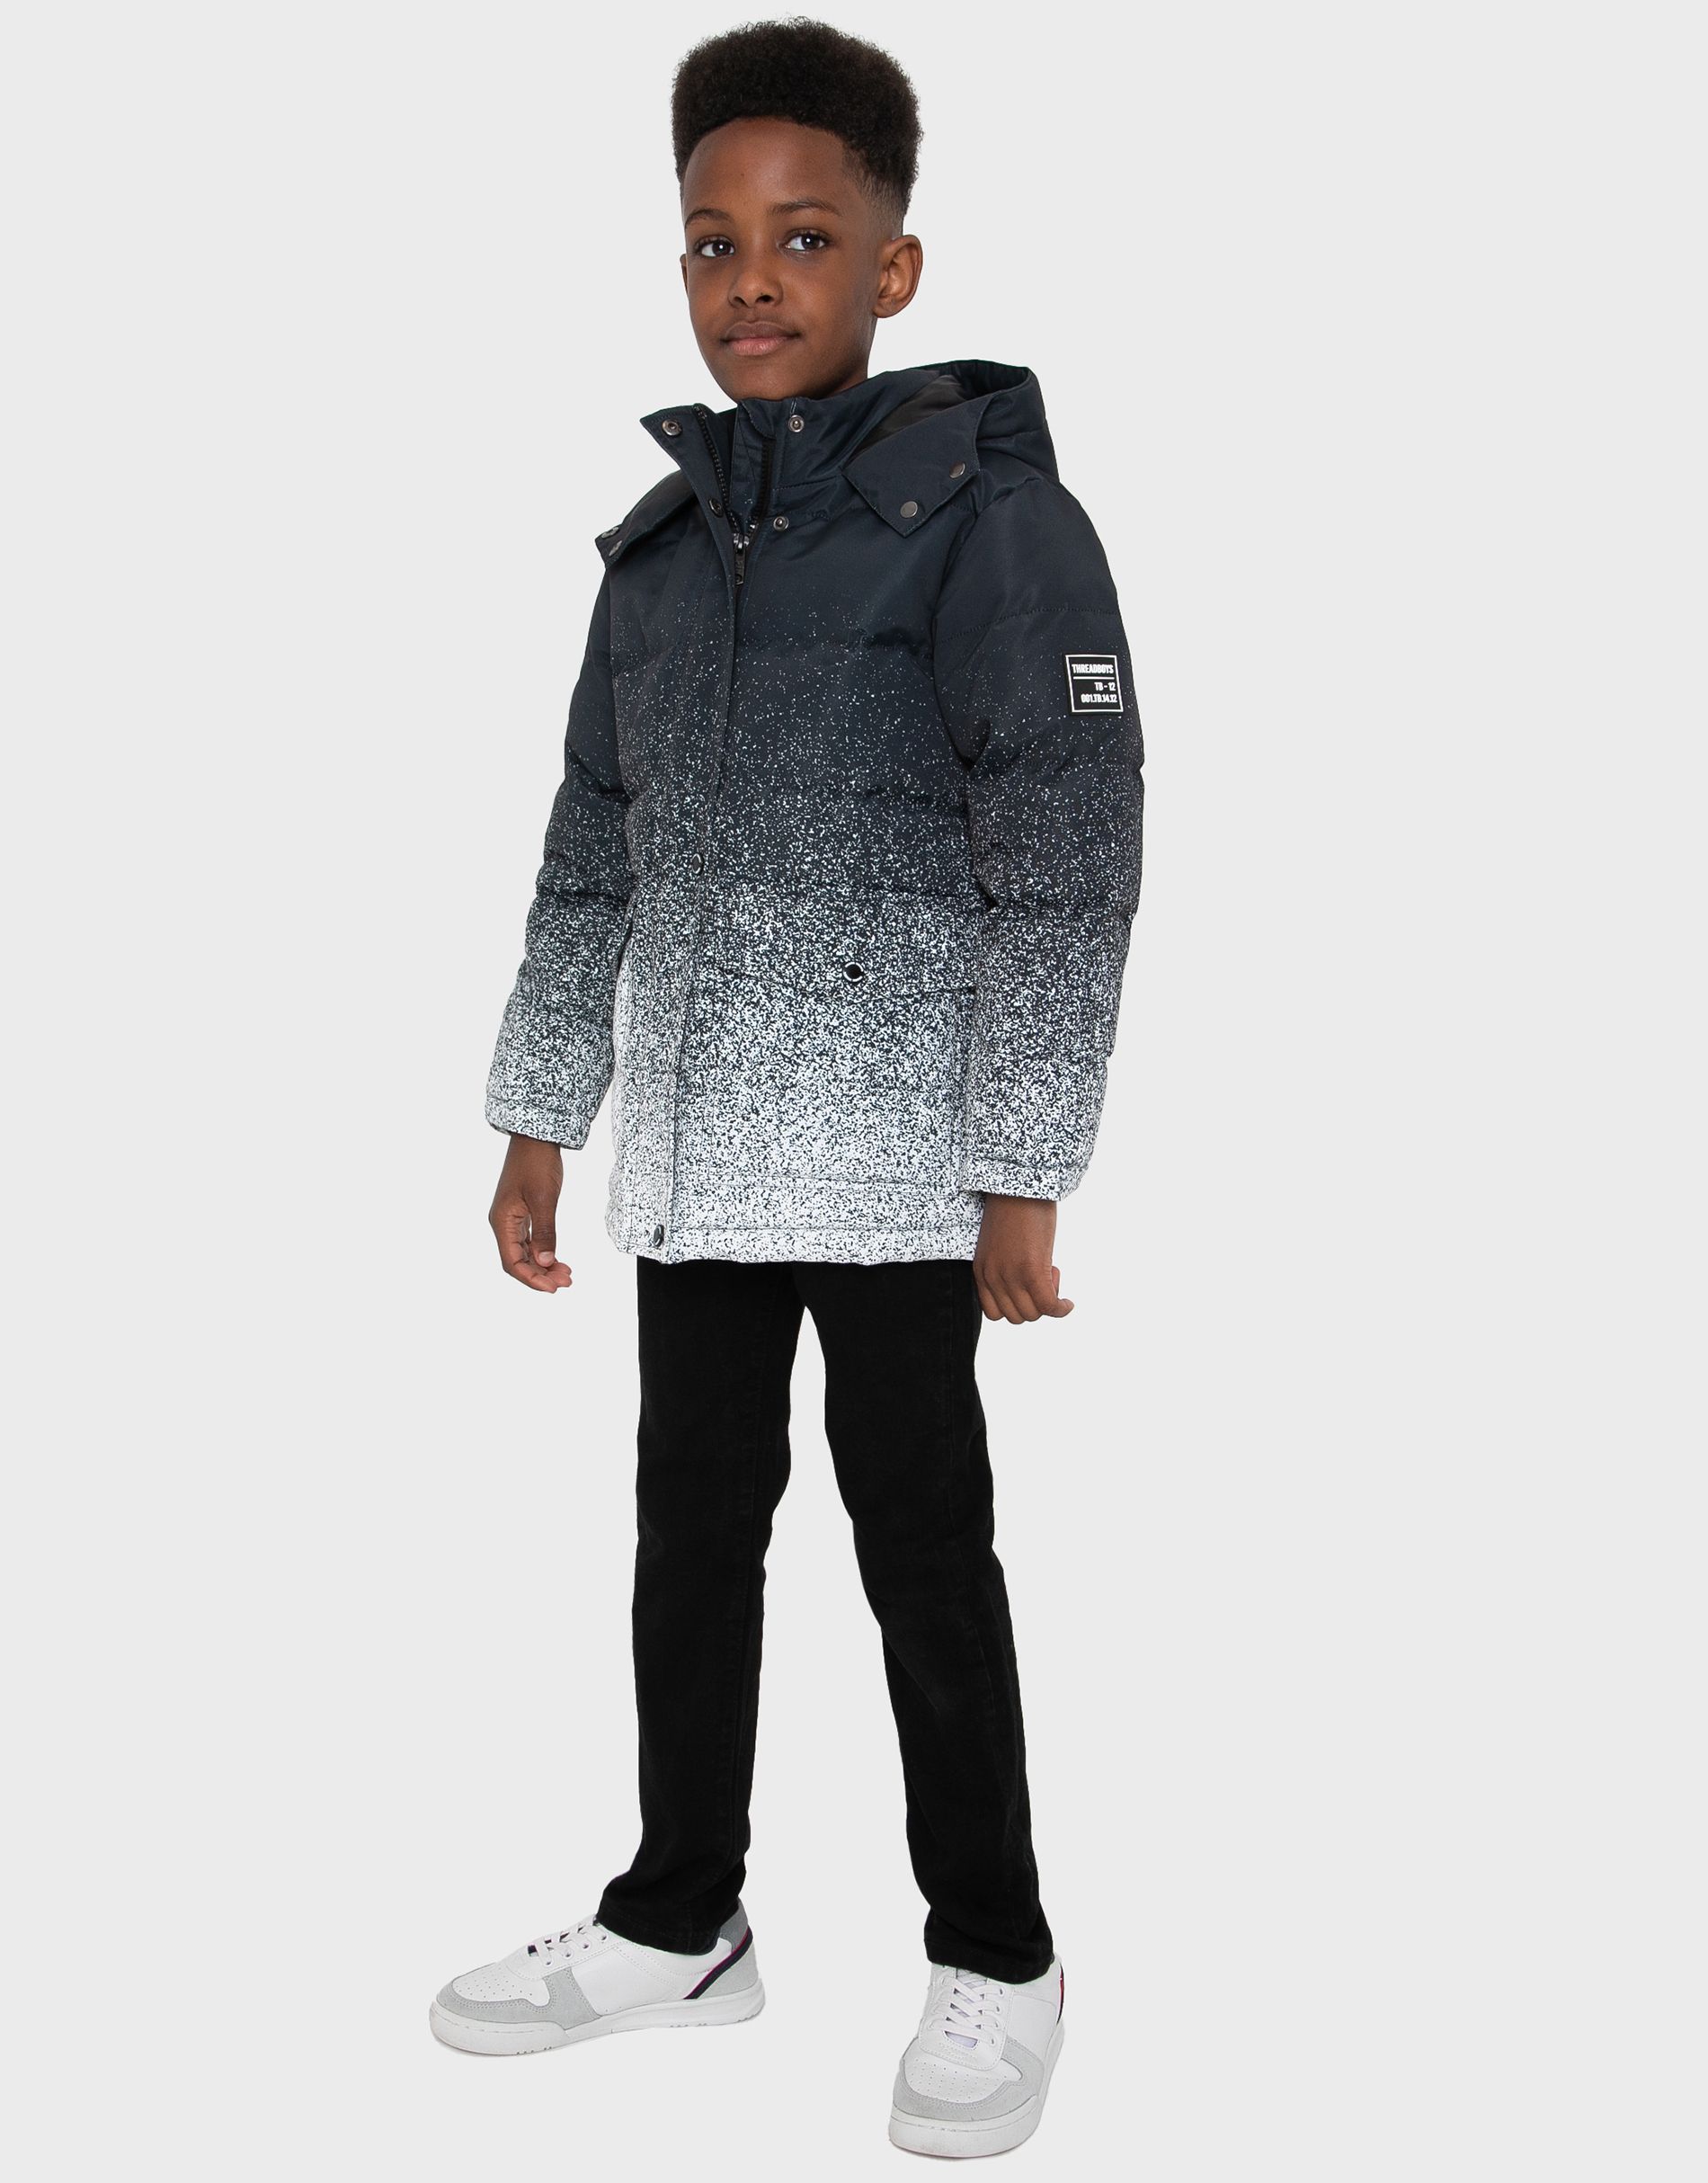 This hooded, padded jacket from Threadboys features two popper fastening front pockets and a storm guard concealing the zip fastening. It has a branded badge on the sleeve and elasticated hem and cuffs. The perfect addition to keep warm and dry this back to school season. Other styles available.